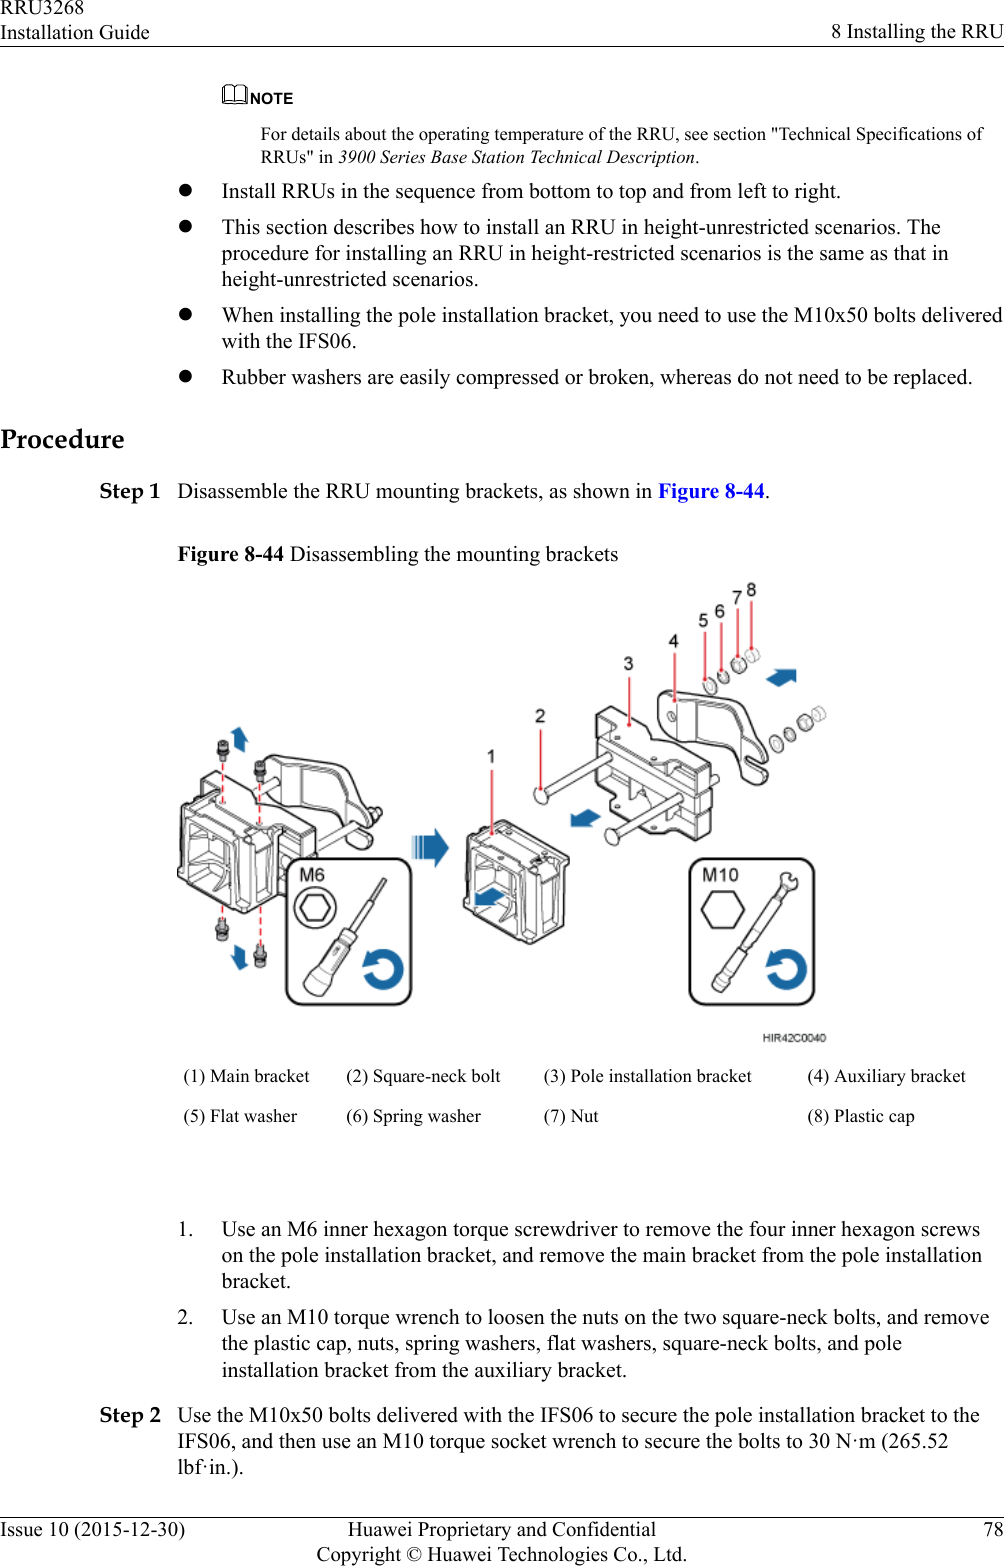 NOTEFor details about the operating temperature of the RRU, see section &quot;Technical Specifications ofRRUs&quot; in 3900 Series Base Station Technical Description.lInstall RRUs in the sequence from bottom to top and from left to right.lThis section describes how to install an RRU in height-unrestricted scenarios. Theprocedure for installing an RRU in height-restricted scenarios is the same as that inheight-unrestricted scenarios.lWhen installing the pole installation bracket, you need to use the M10x50 bolts deliveredwith the IFS06.lRubber washers are easily compressed or broken, whereas do not need to be replaced.ProcedureStep 1 Disassemble the RRU mounting brackets, as shown in Figure 8-44.Figure 8-44 Disassembling the mounting brackets(1) Main bracket (2) Square-neck bolt (3) Pole installation bracket (4) Auxiliary bracket(5) Flat washer (6) Spring washer (7) Nut (8) Plastic cap 1. Use an M6 inner hexagon torque screwdriver to remove the four inner hexagon screwson the pole installation bracket, and remove the main bracket from the pole installationbracket.2. Use an M10 torque wrench to loosen the nuts on the two square-neck bolts, and removethe plastic cap, nuts, spring washers, flat washers, square-neck bolts, and poleinstallation bracket from the auxiliary bracket.Step 2 Use the M10x50 bolts delivered with the IFS06 to secure the pole installation bracket to theIFS06, and then use an M10 torque socket wrench to secure the bolts to 30 N·m (265.52lbf·in.).RRU3268Installation Guide 8 Installing the RRUIssue 10 (2015-12-30) Huawei Proprietary and ConfidentialCopyright © Huawei Technologies Co., Ltd.78